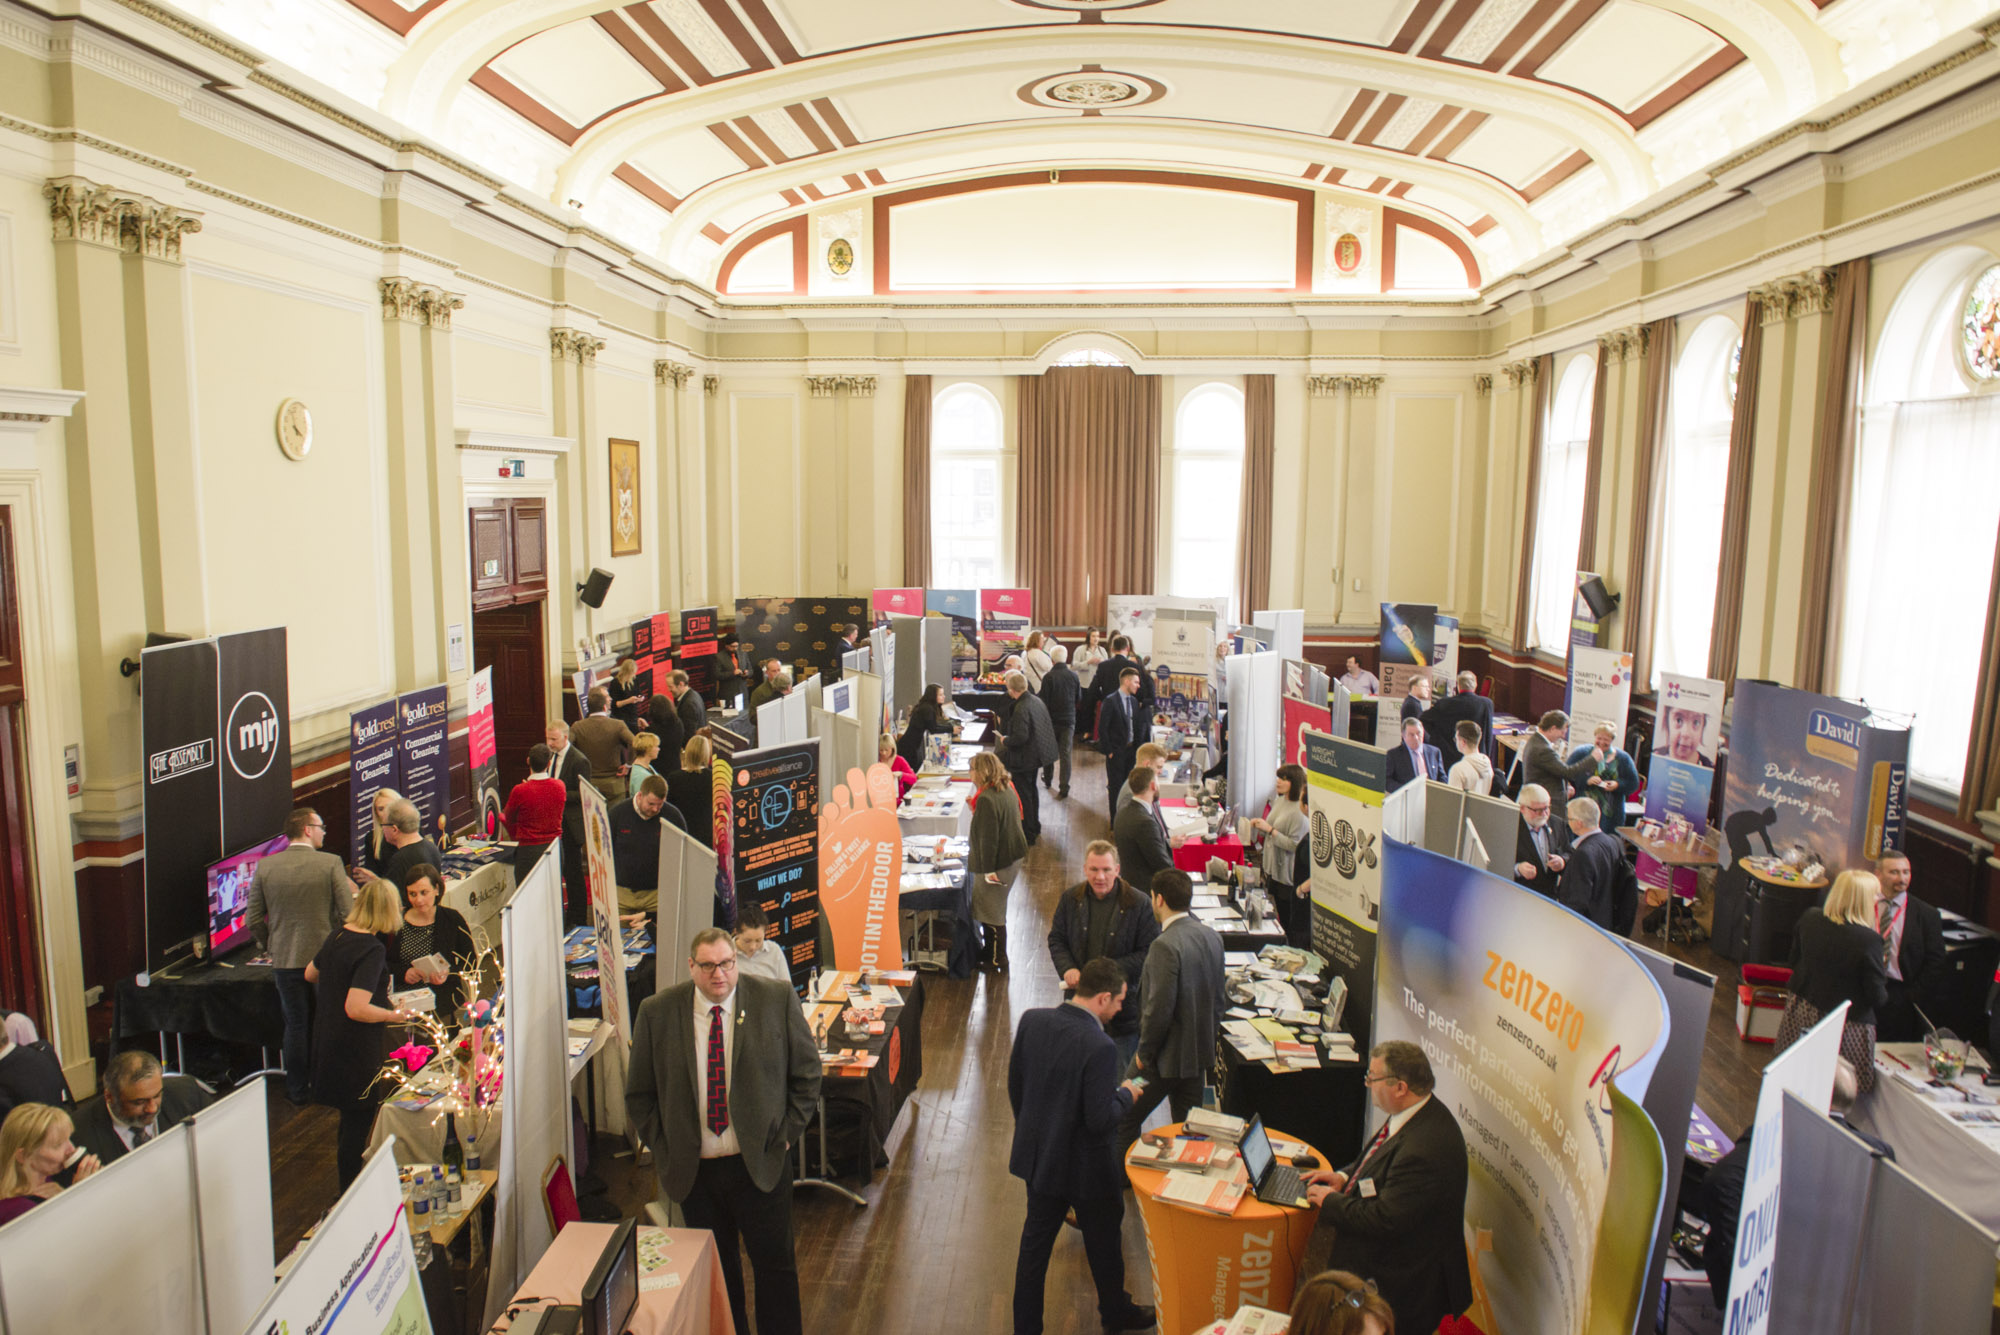 The Leamington Business Show 2018 at Leamington Town Hall